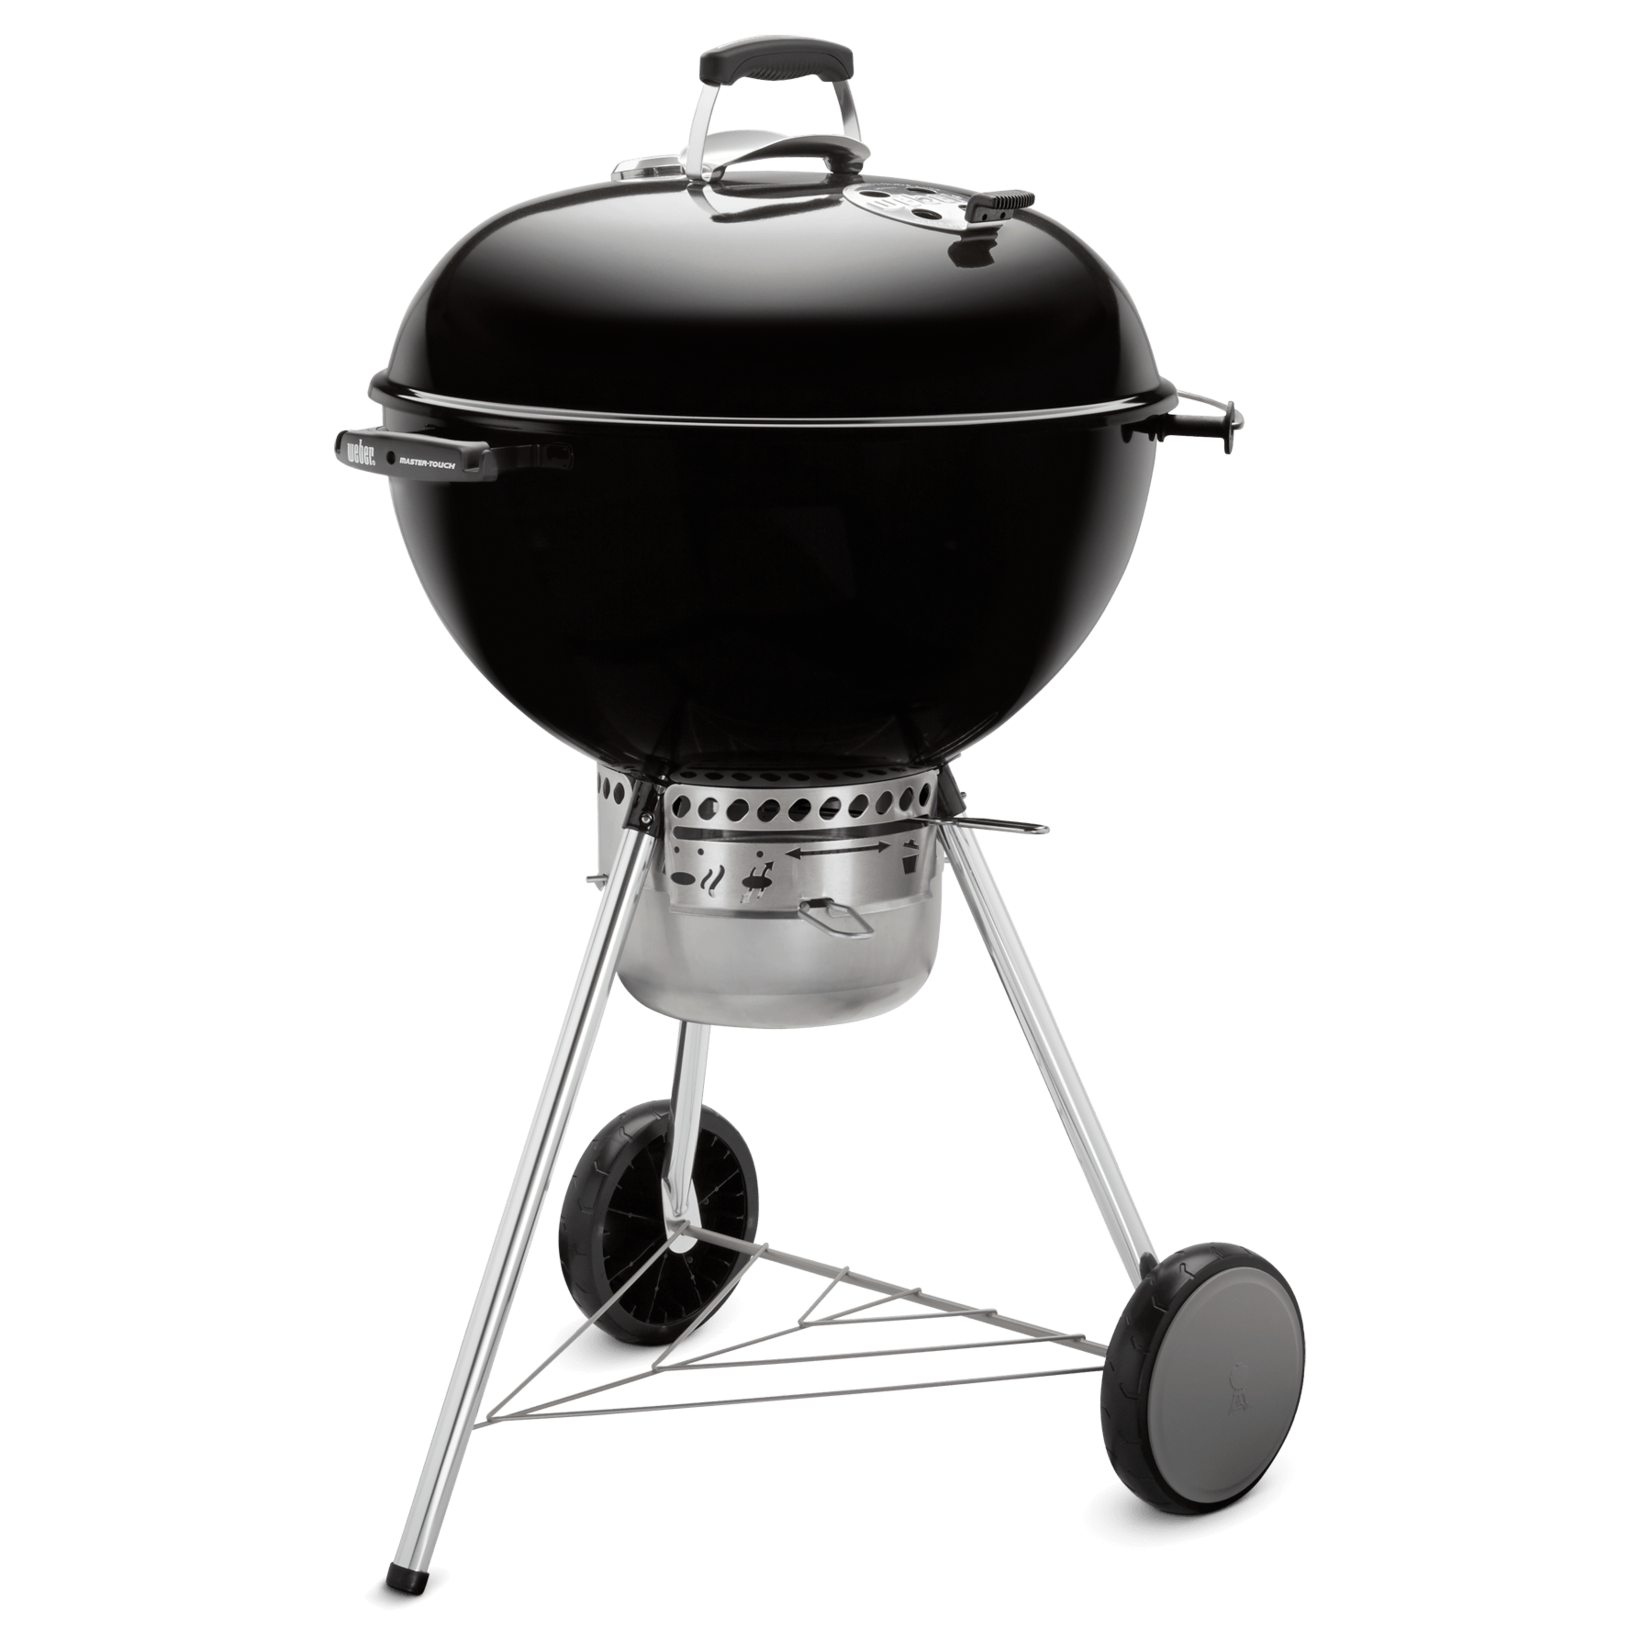 Weber Master-Touch 22" Charcoal Grill, Black